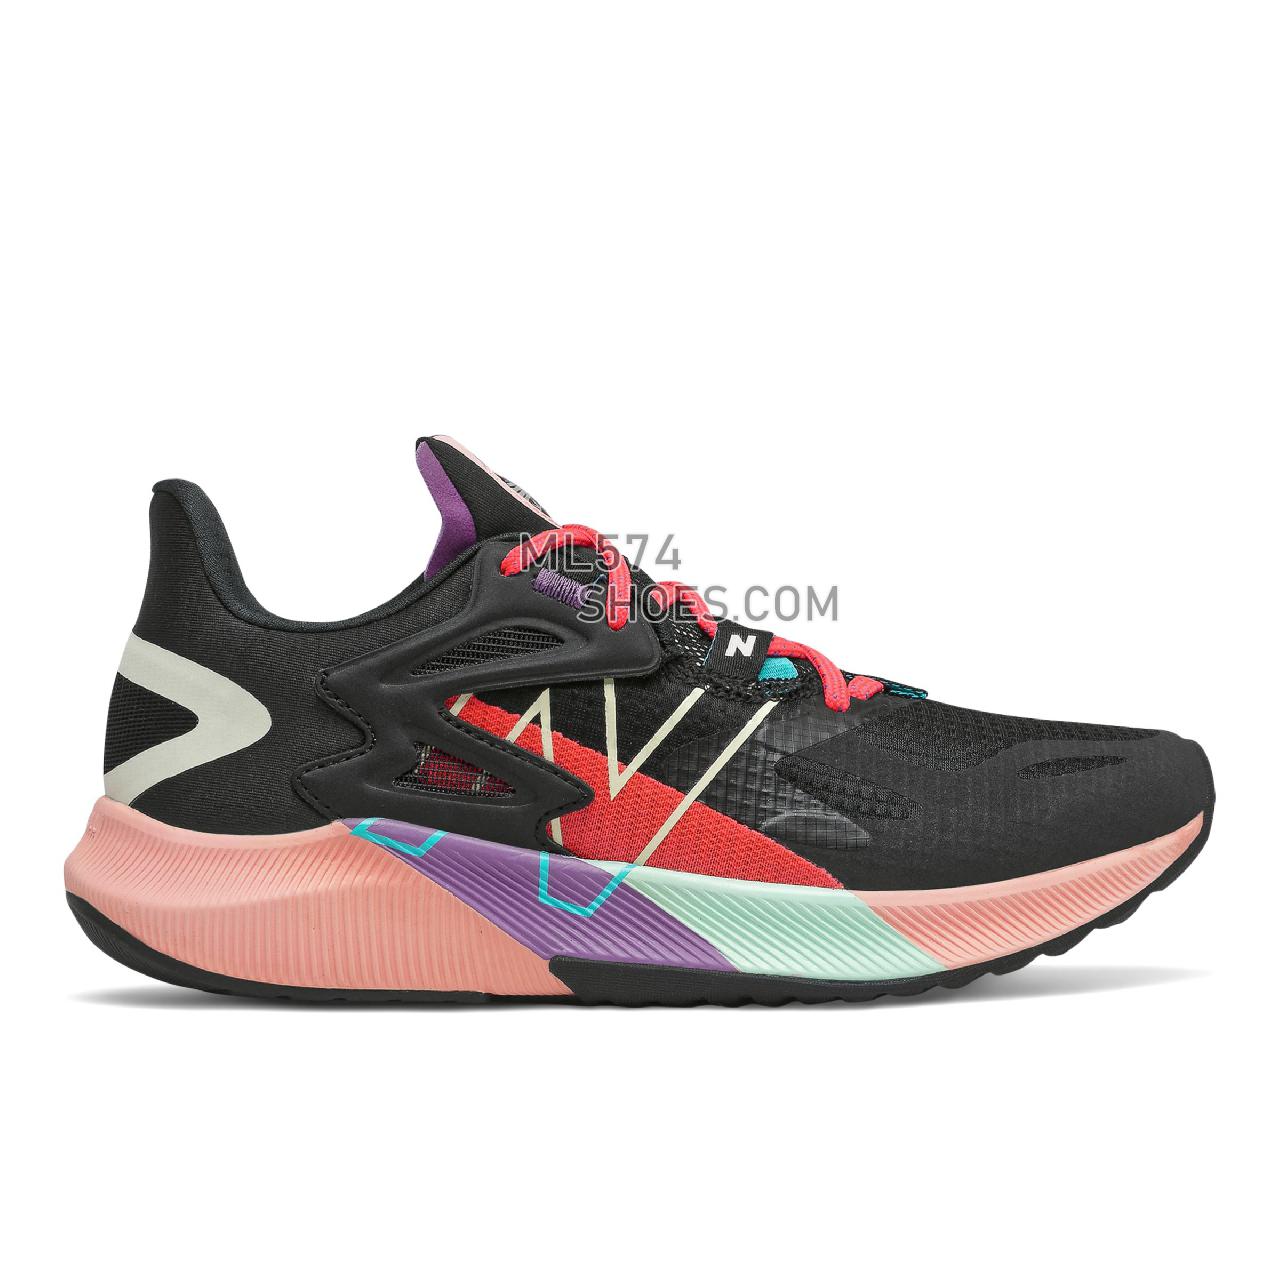 New Balance FuelCell Propel RMX - Women's Fuelcell Sleek And LightWeight - Black with Vivid Coral and Cloud Pink - WPRMXCM